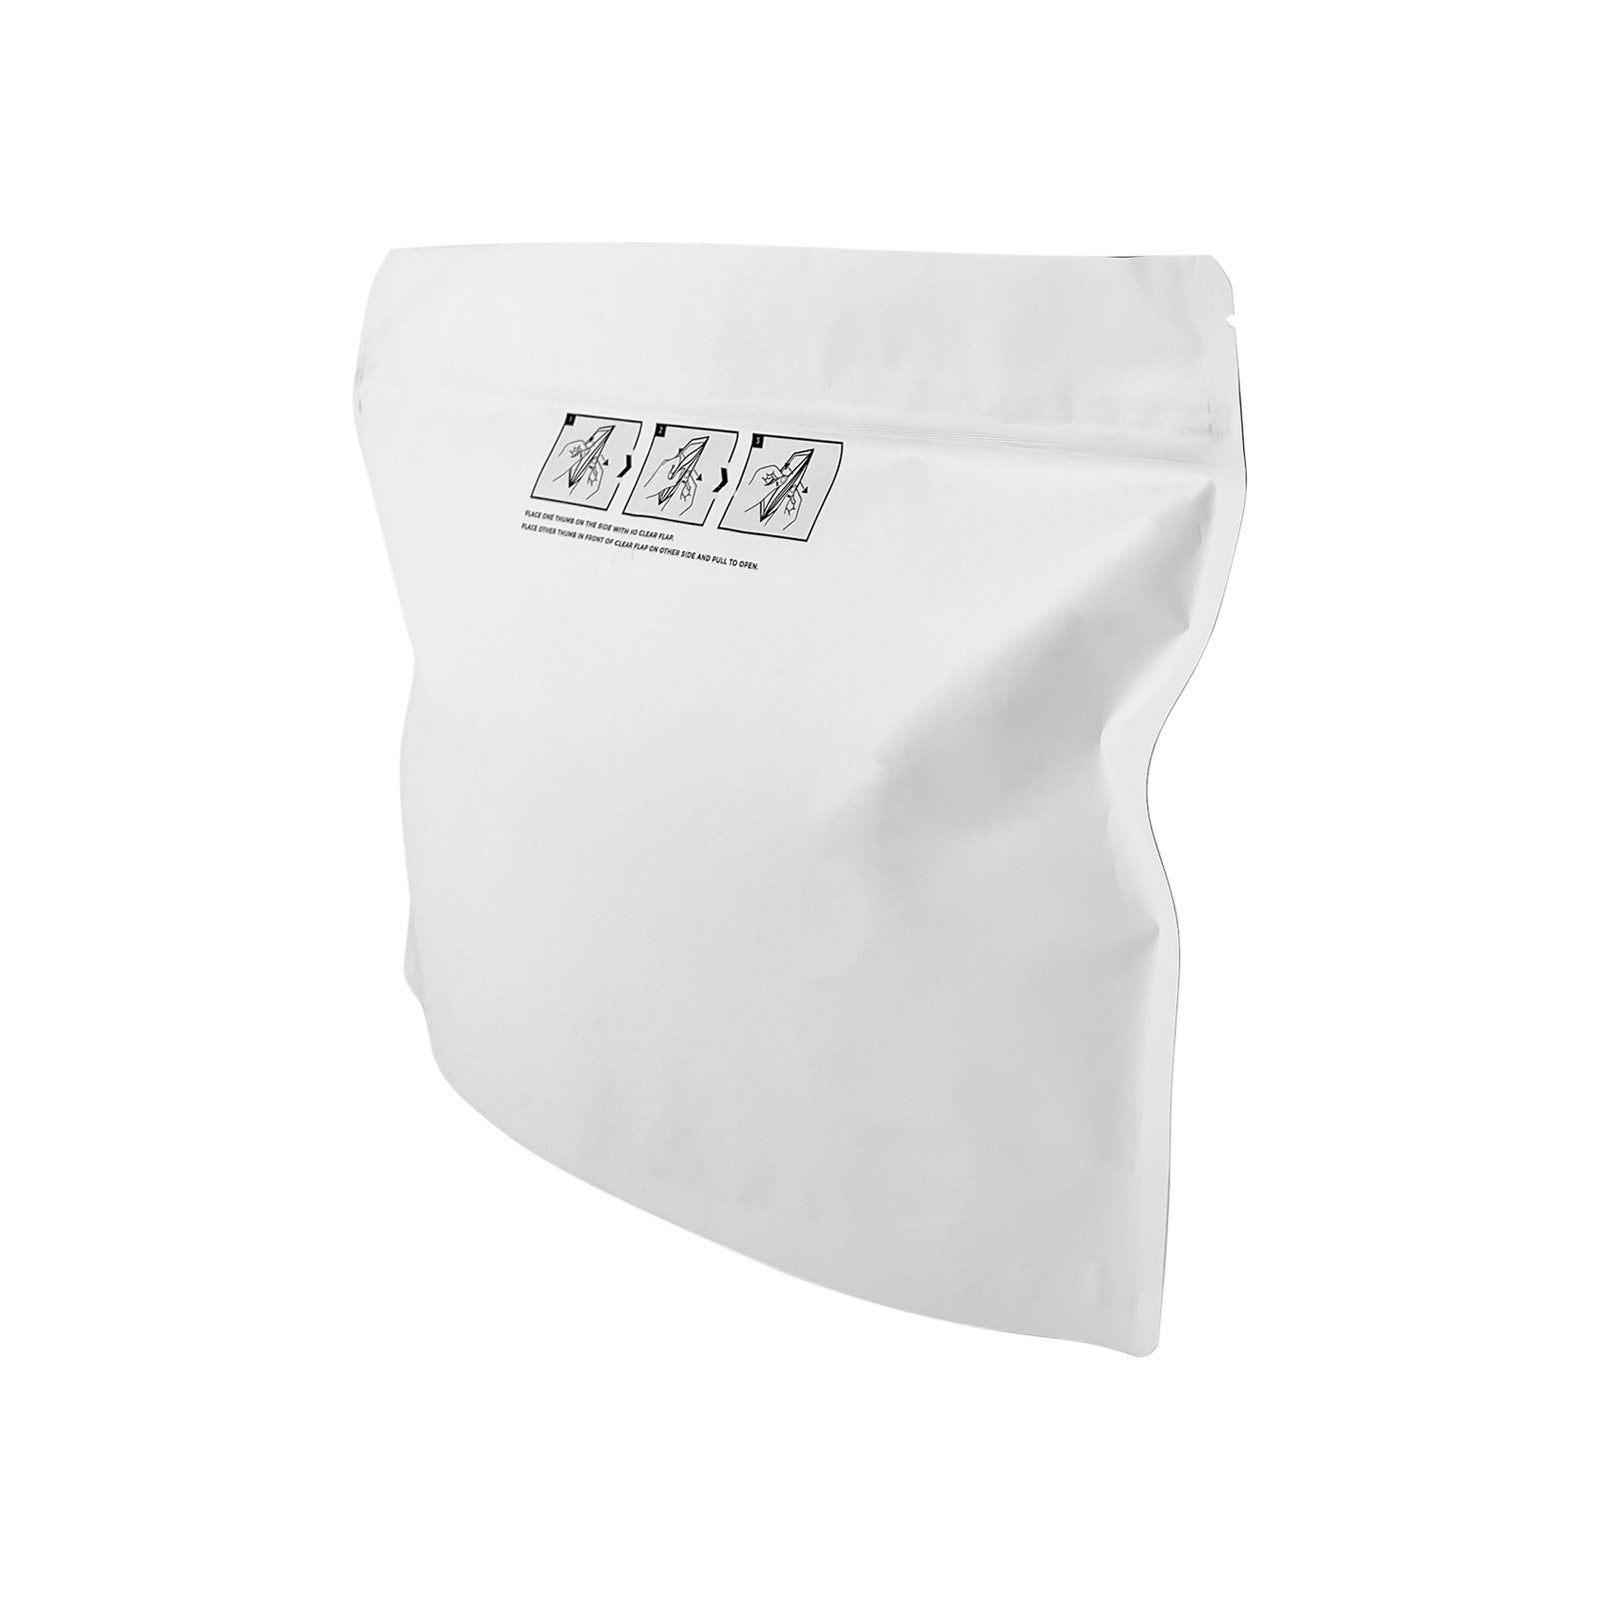 12"x9" Large Child Resistant Exit Bags All White - 50 Count